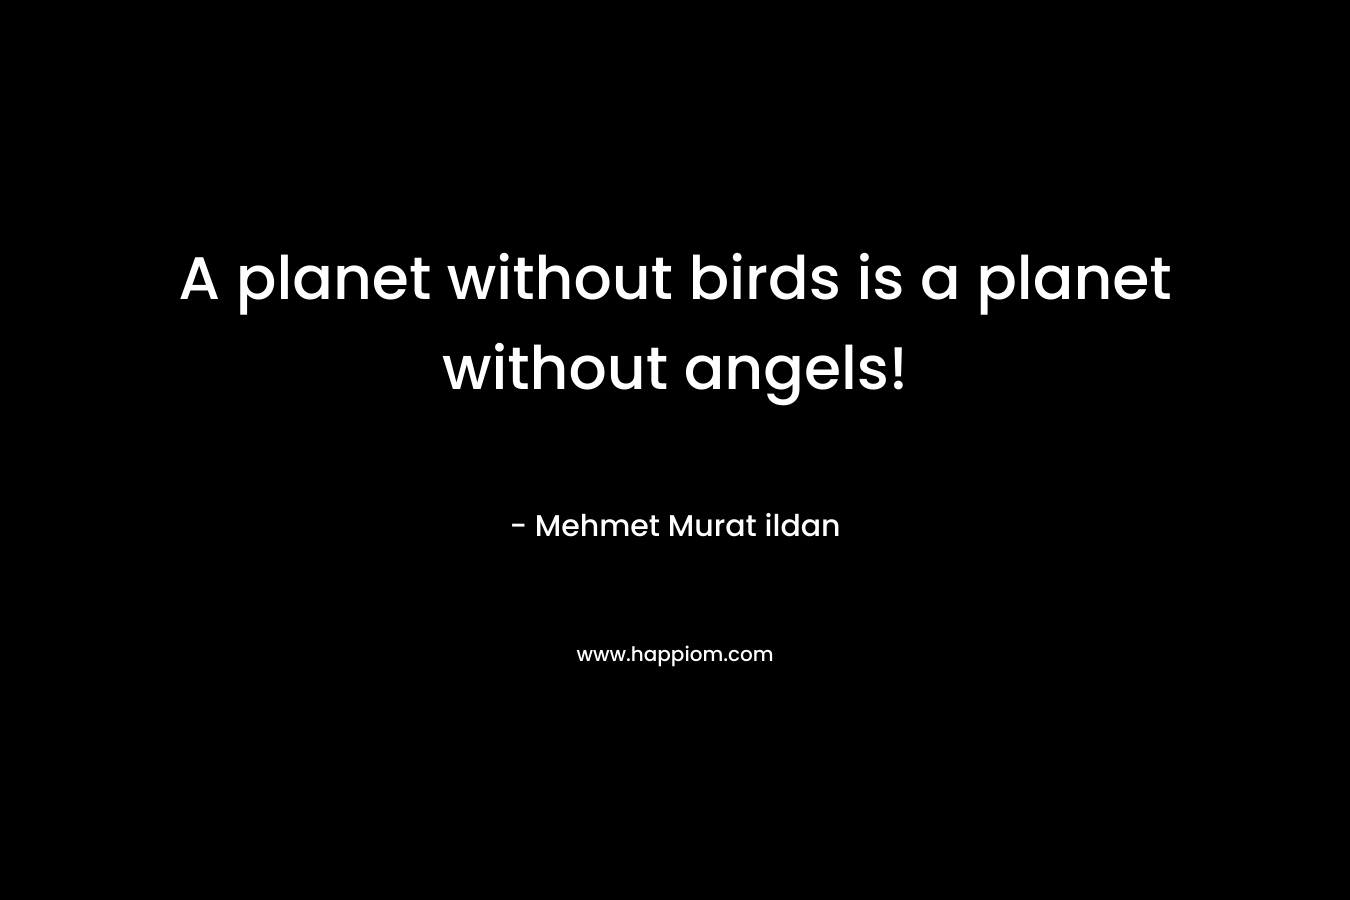 A planet without birds is a planet without angels!